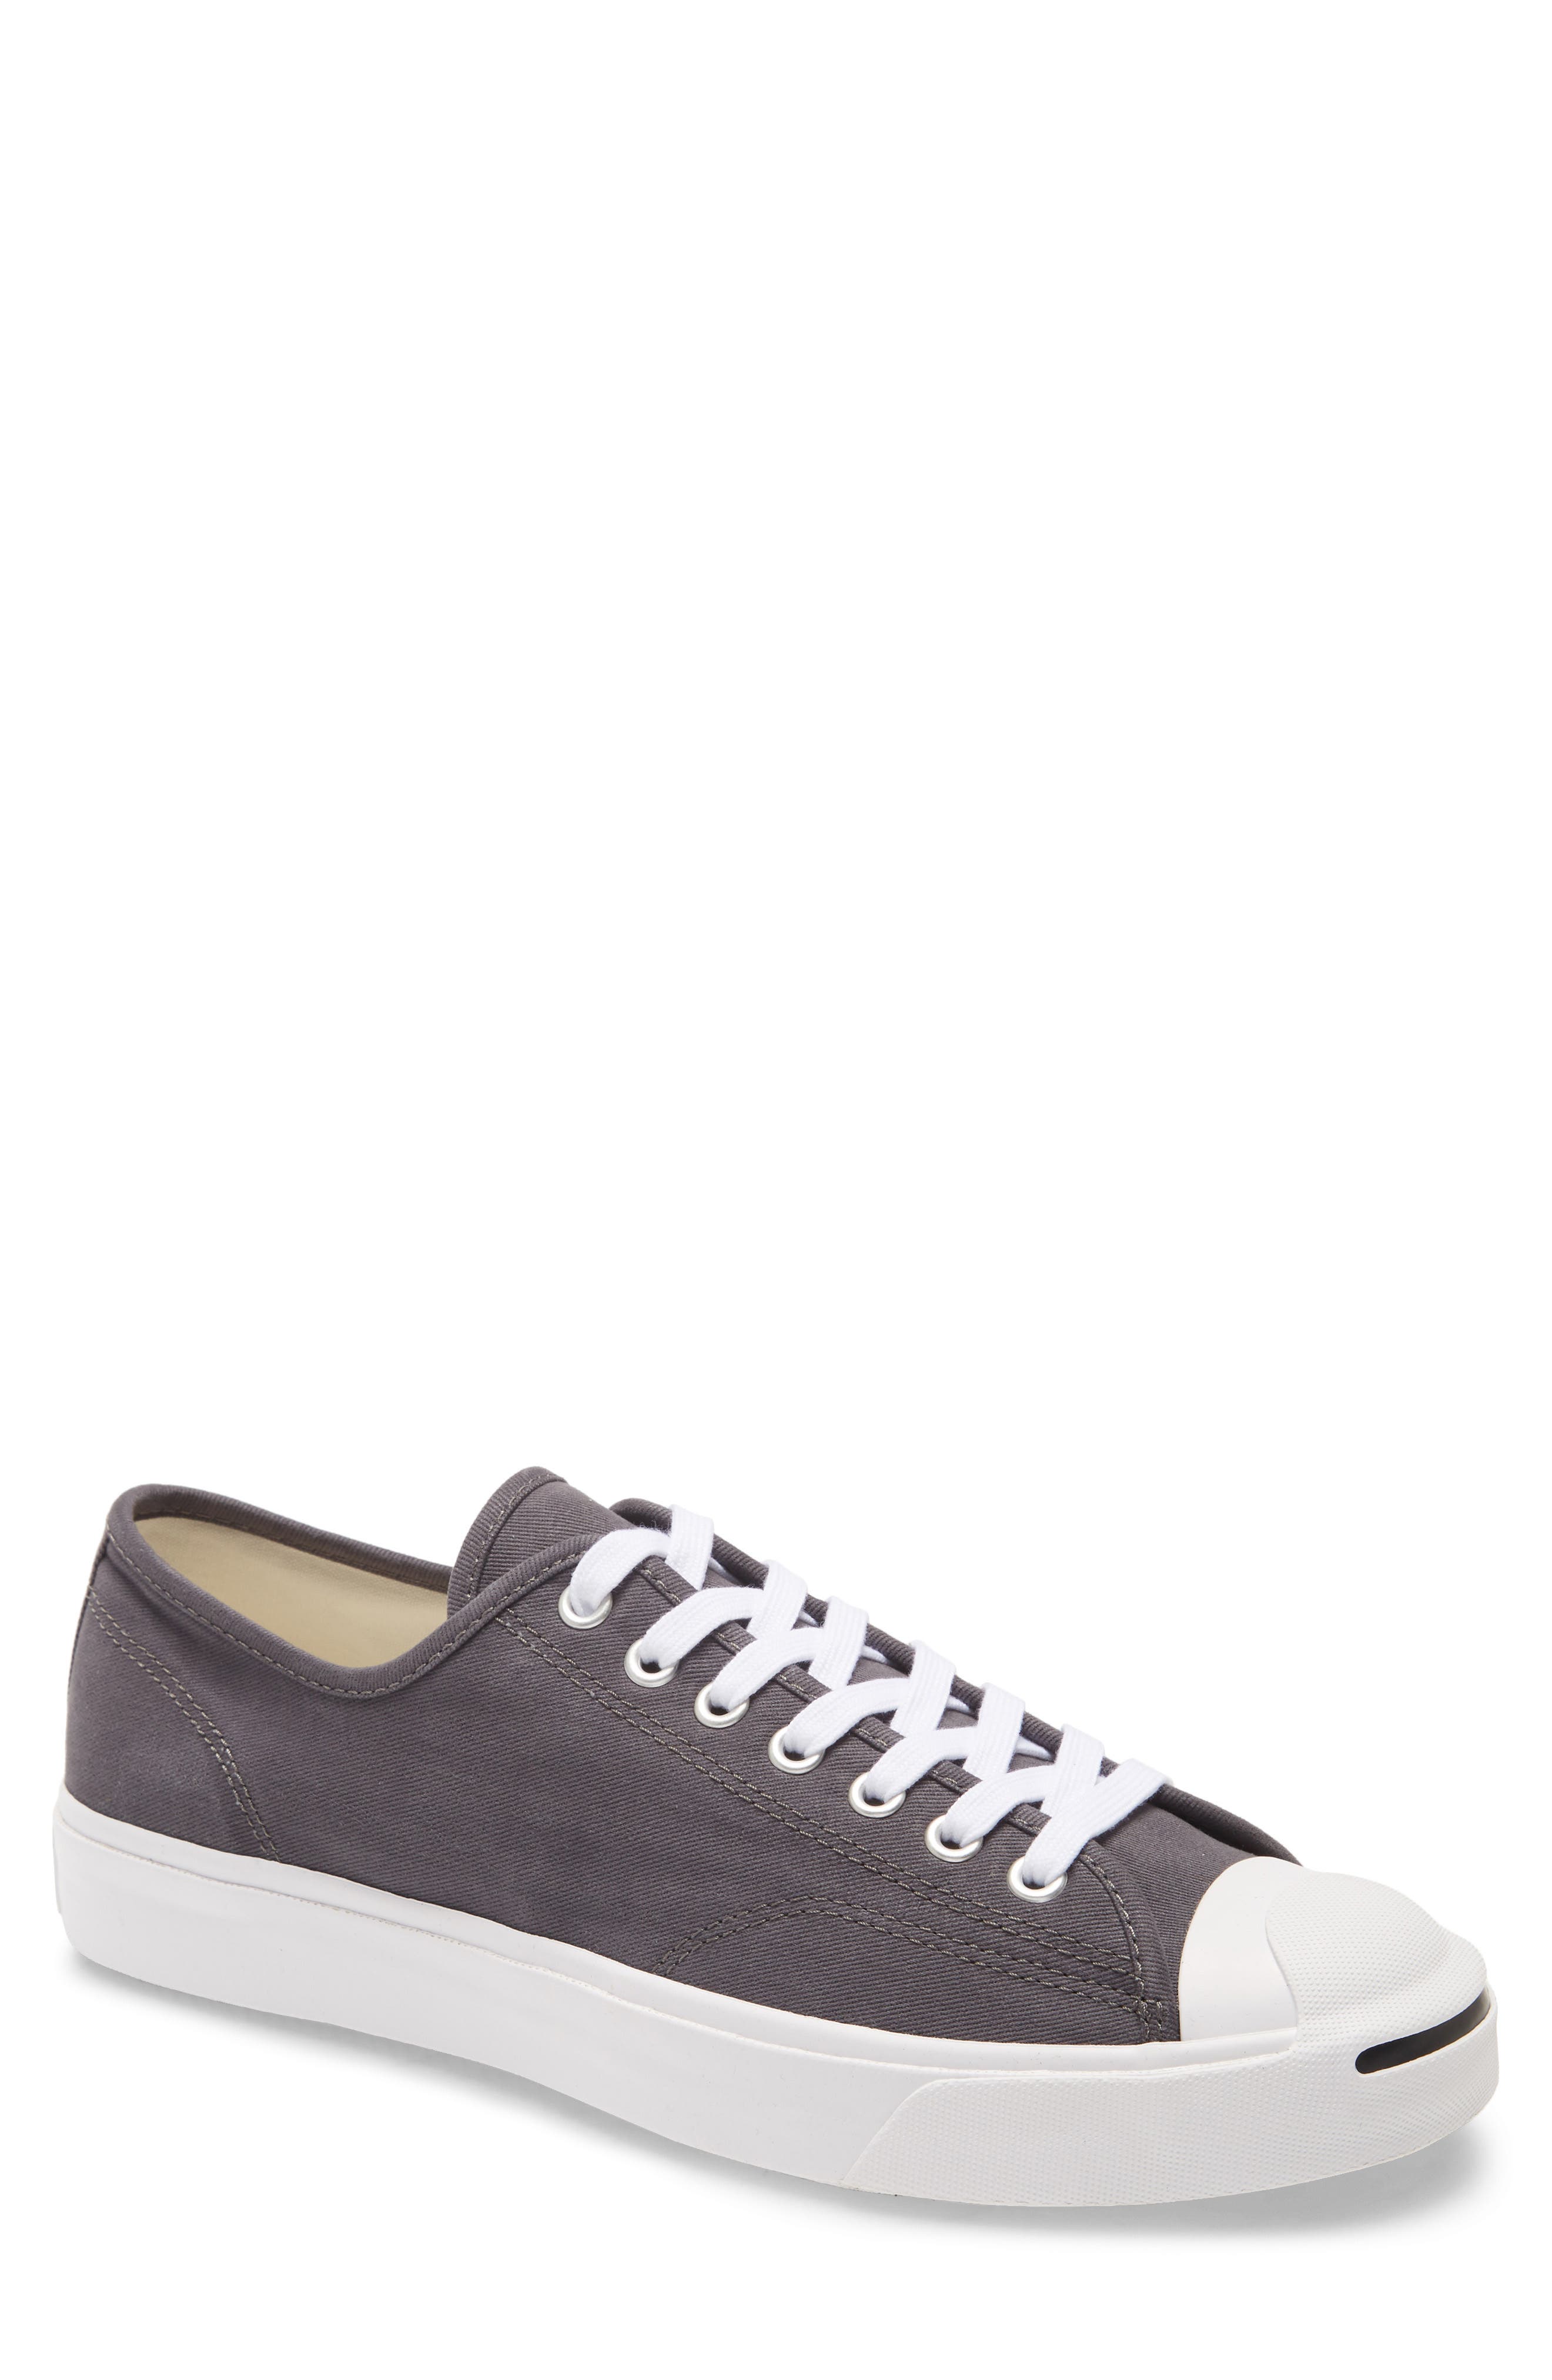 Converse Jack Purcell Gold Standard 